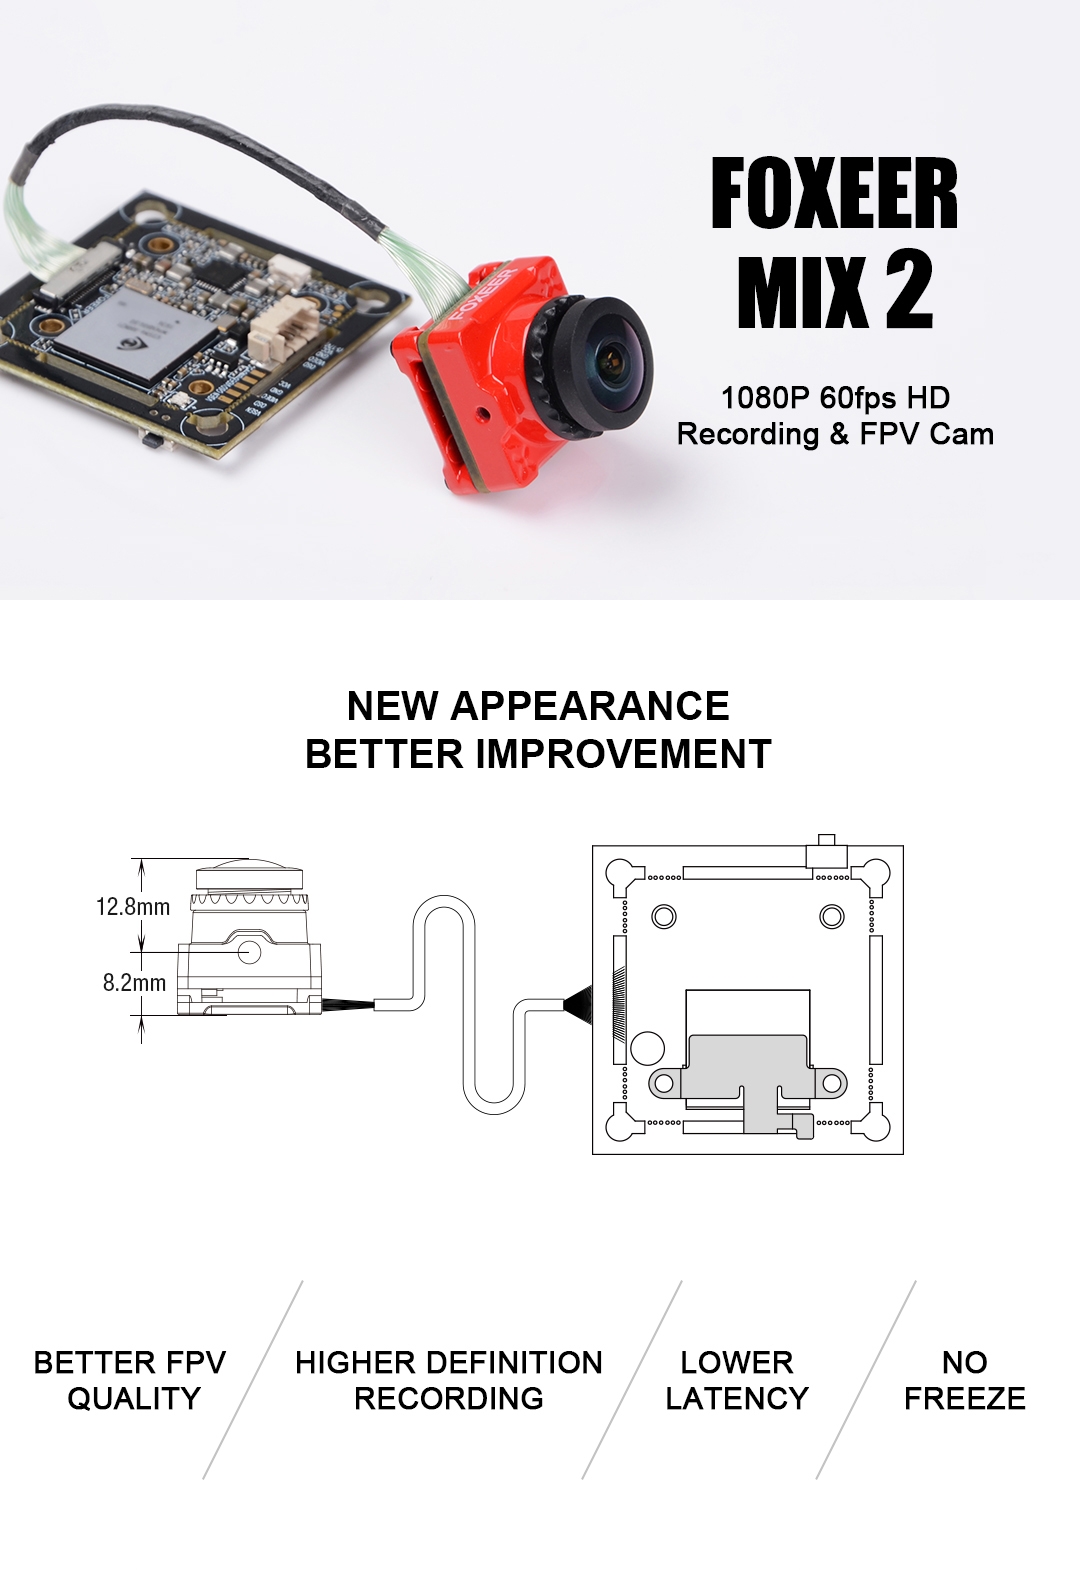 Foxeer Mix 2 1080P 60fps DVR HD Recording Mini FPV Camera Low Latency FOV 155 Degree No Freeze For RC Drone